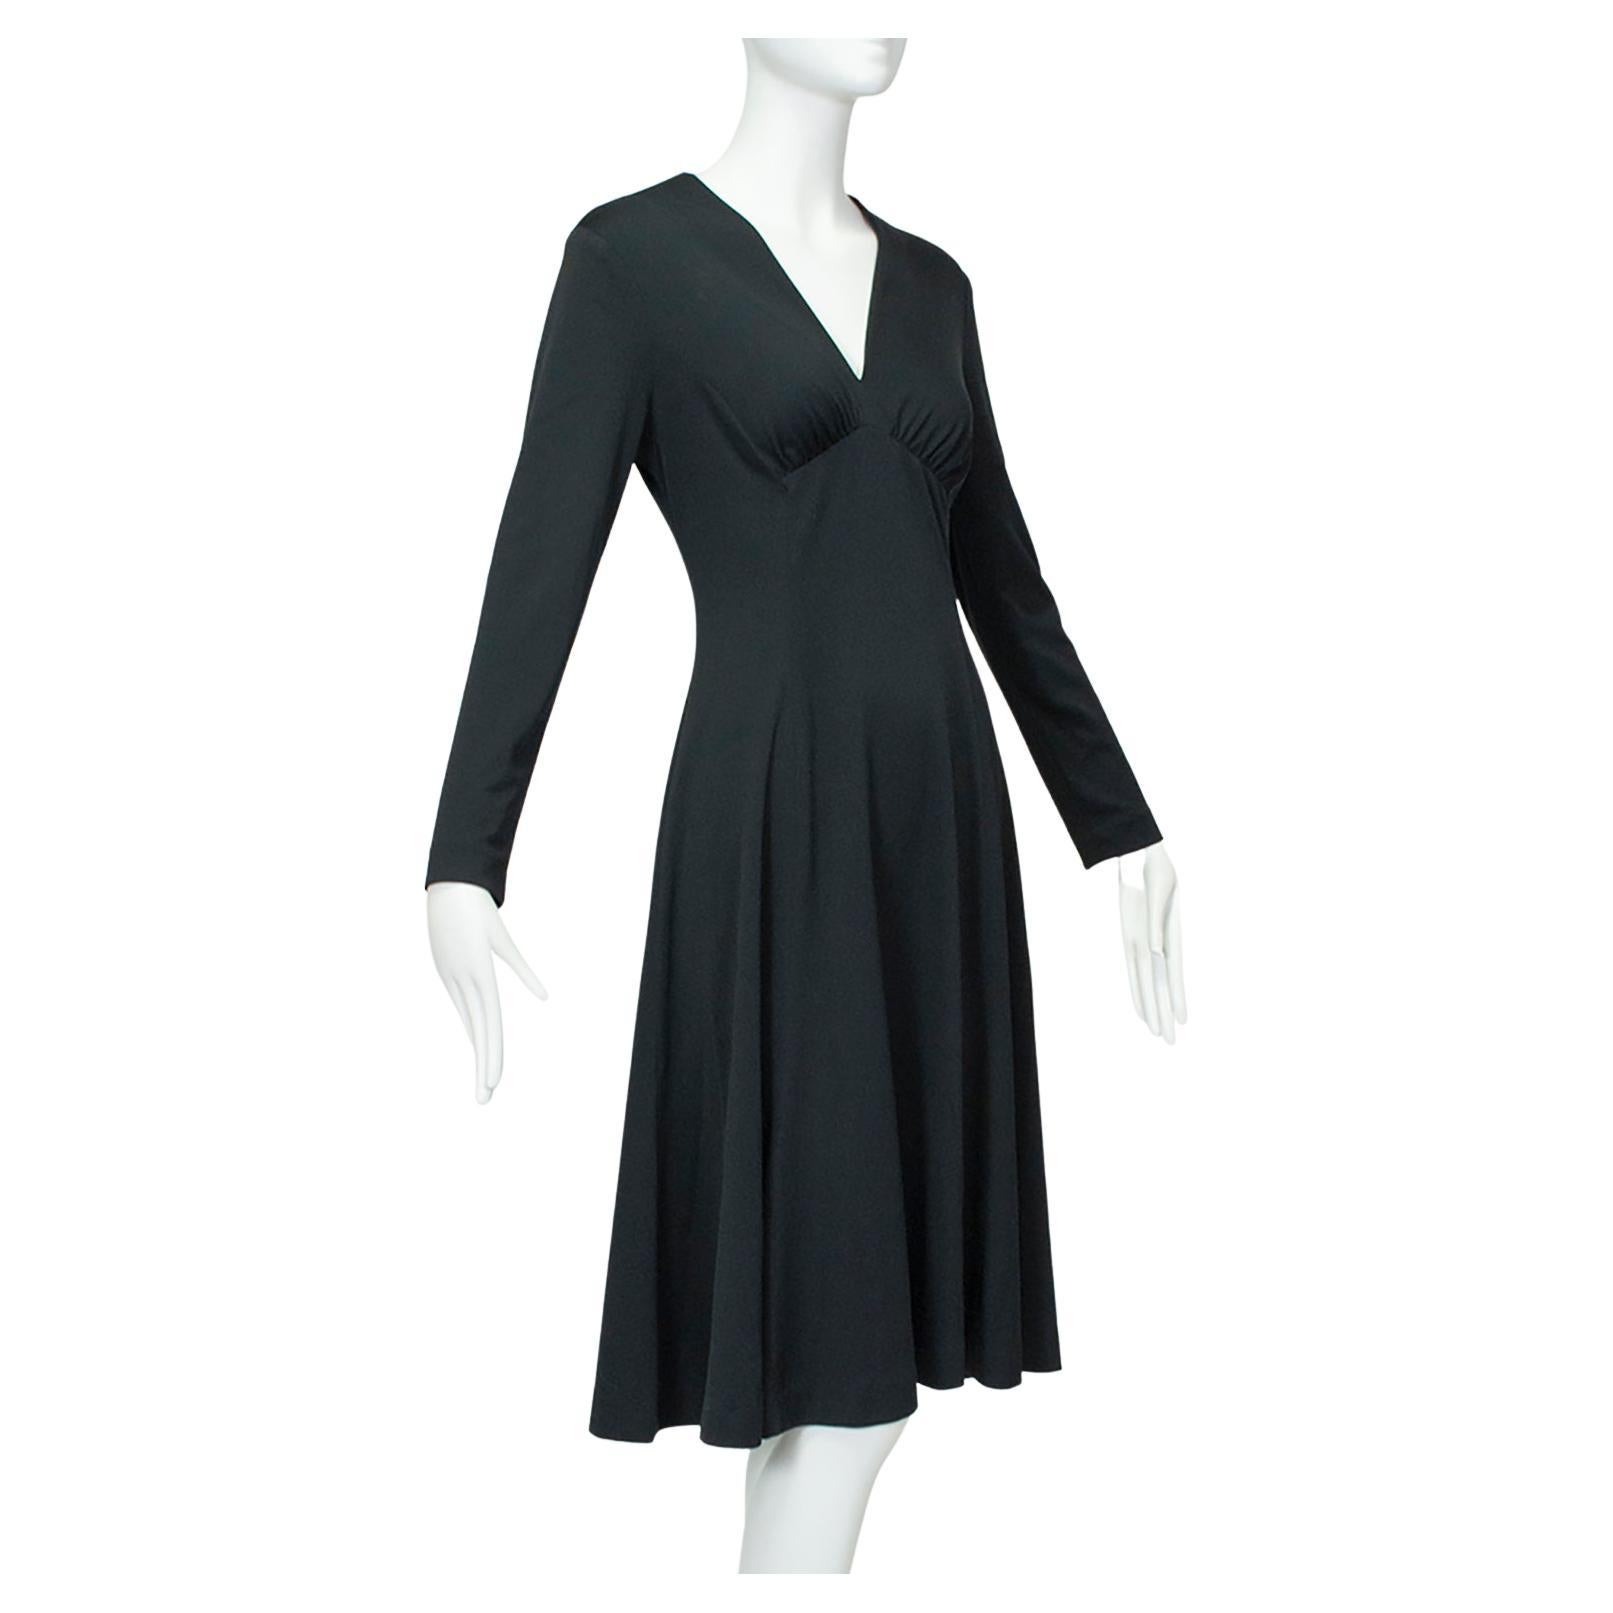 Edith Flagg Black Swirling Princess Dance Dress with Plunging Bodice – M, 1960s